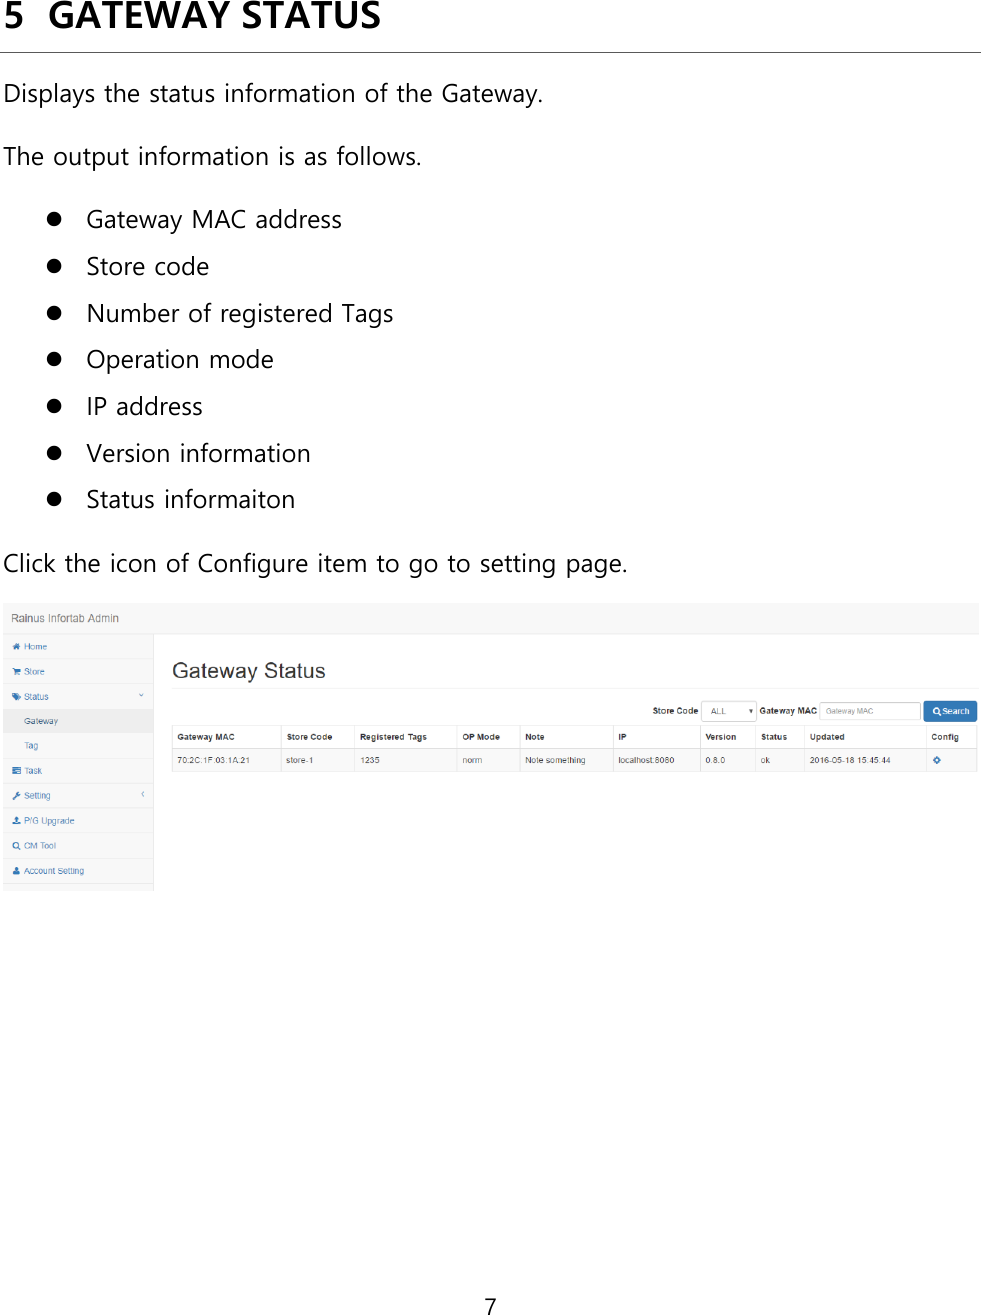 7  5 GATEWAY STATUS Displays the status information of the Gateway. The output information is as follows. ⚫ Gateway MAC address ⚫ Store code ⚫ Number of registered Tags ⚫ Operation mode ⚫ IP address ⚫ Version information ⚫ Status informaiton Click the icon of Configure item to go to setting page.    